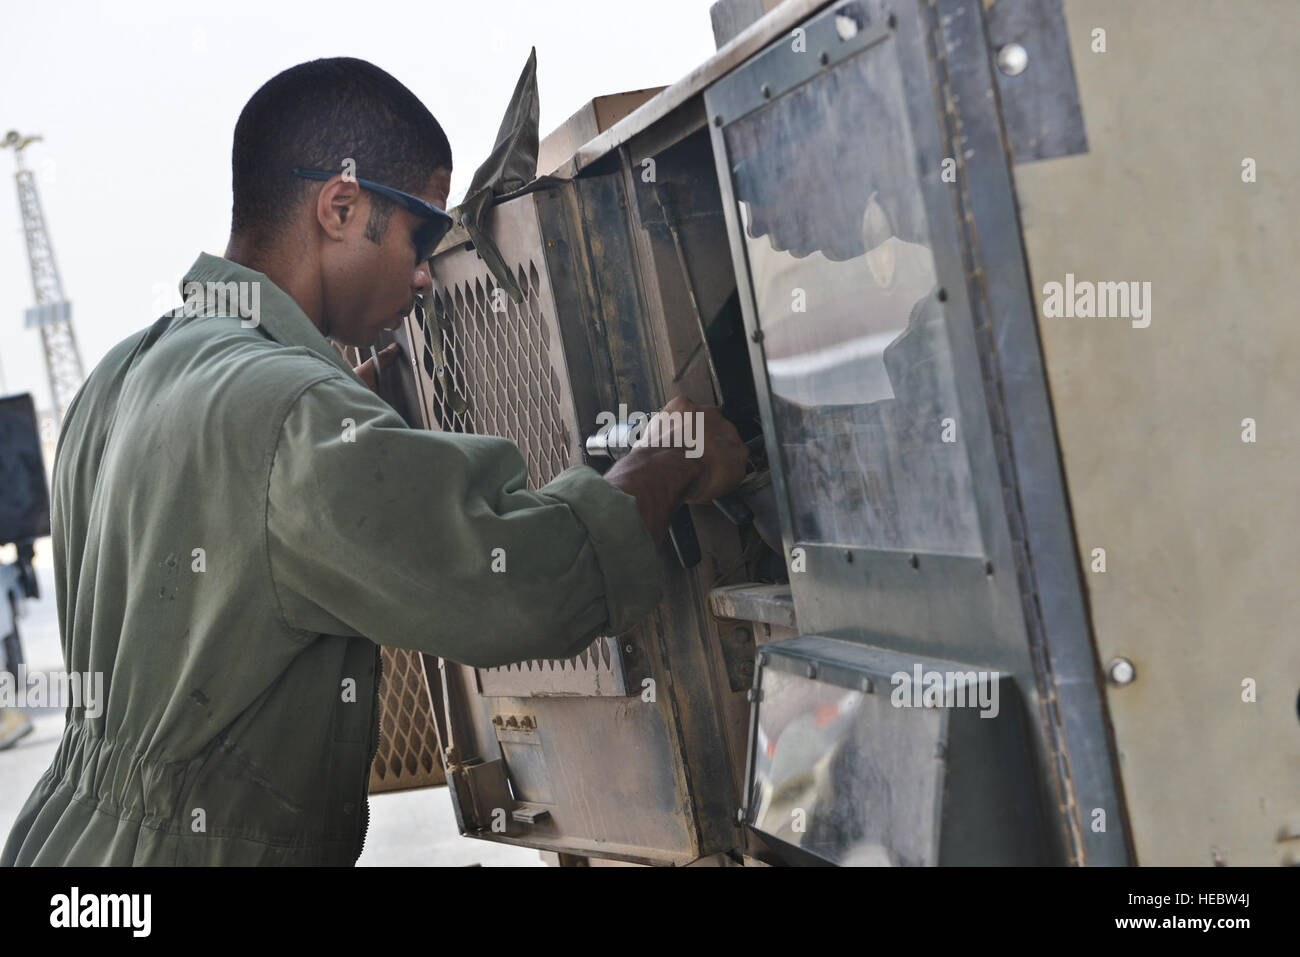 Senior Airman Udoka Addy, 379th Expeditionary Maintenance Squadron, applies rivets to a generator door during routine aerospace ground equipment repairs May 7, 2015 at Al Udeid Air Base, Qatar. Aircraft ground equipment airmen rotate shifts to ensure day and night operations are supplied with functioning equipment. These airmen endure heat that sometimes reaches above 100 degrees Fahrenheit causing them to sometimes work in black flag conditions. (U.S. Air Force photo by Staff Sgt. Alexandre Montes) Stock Photo